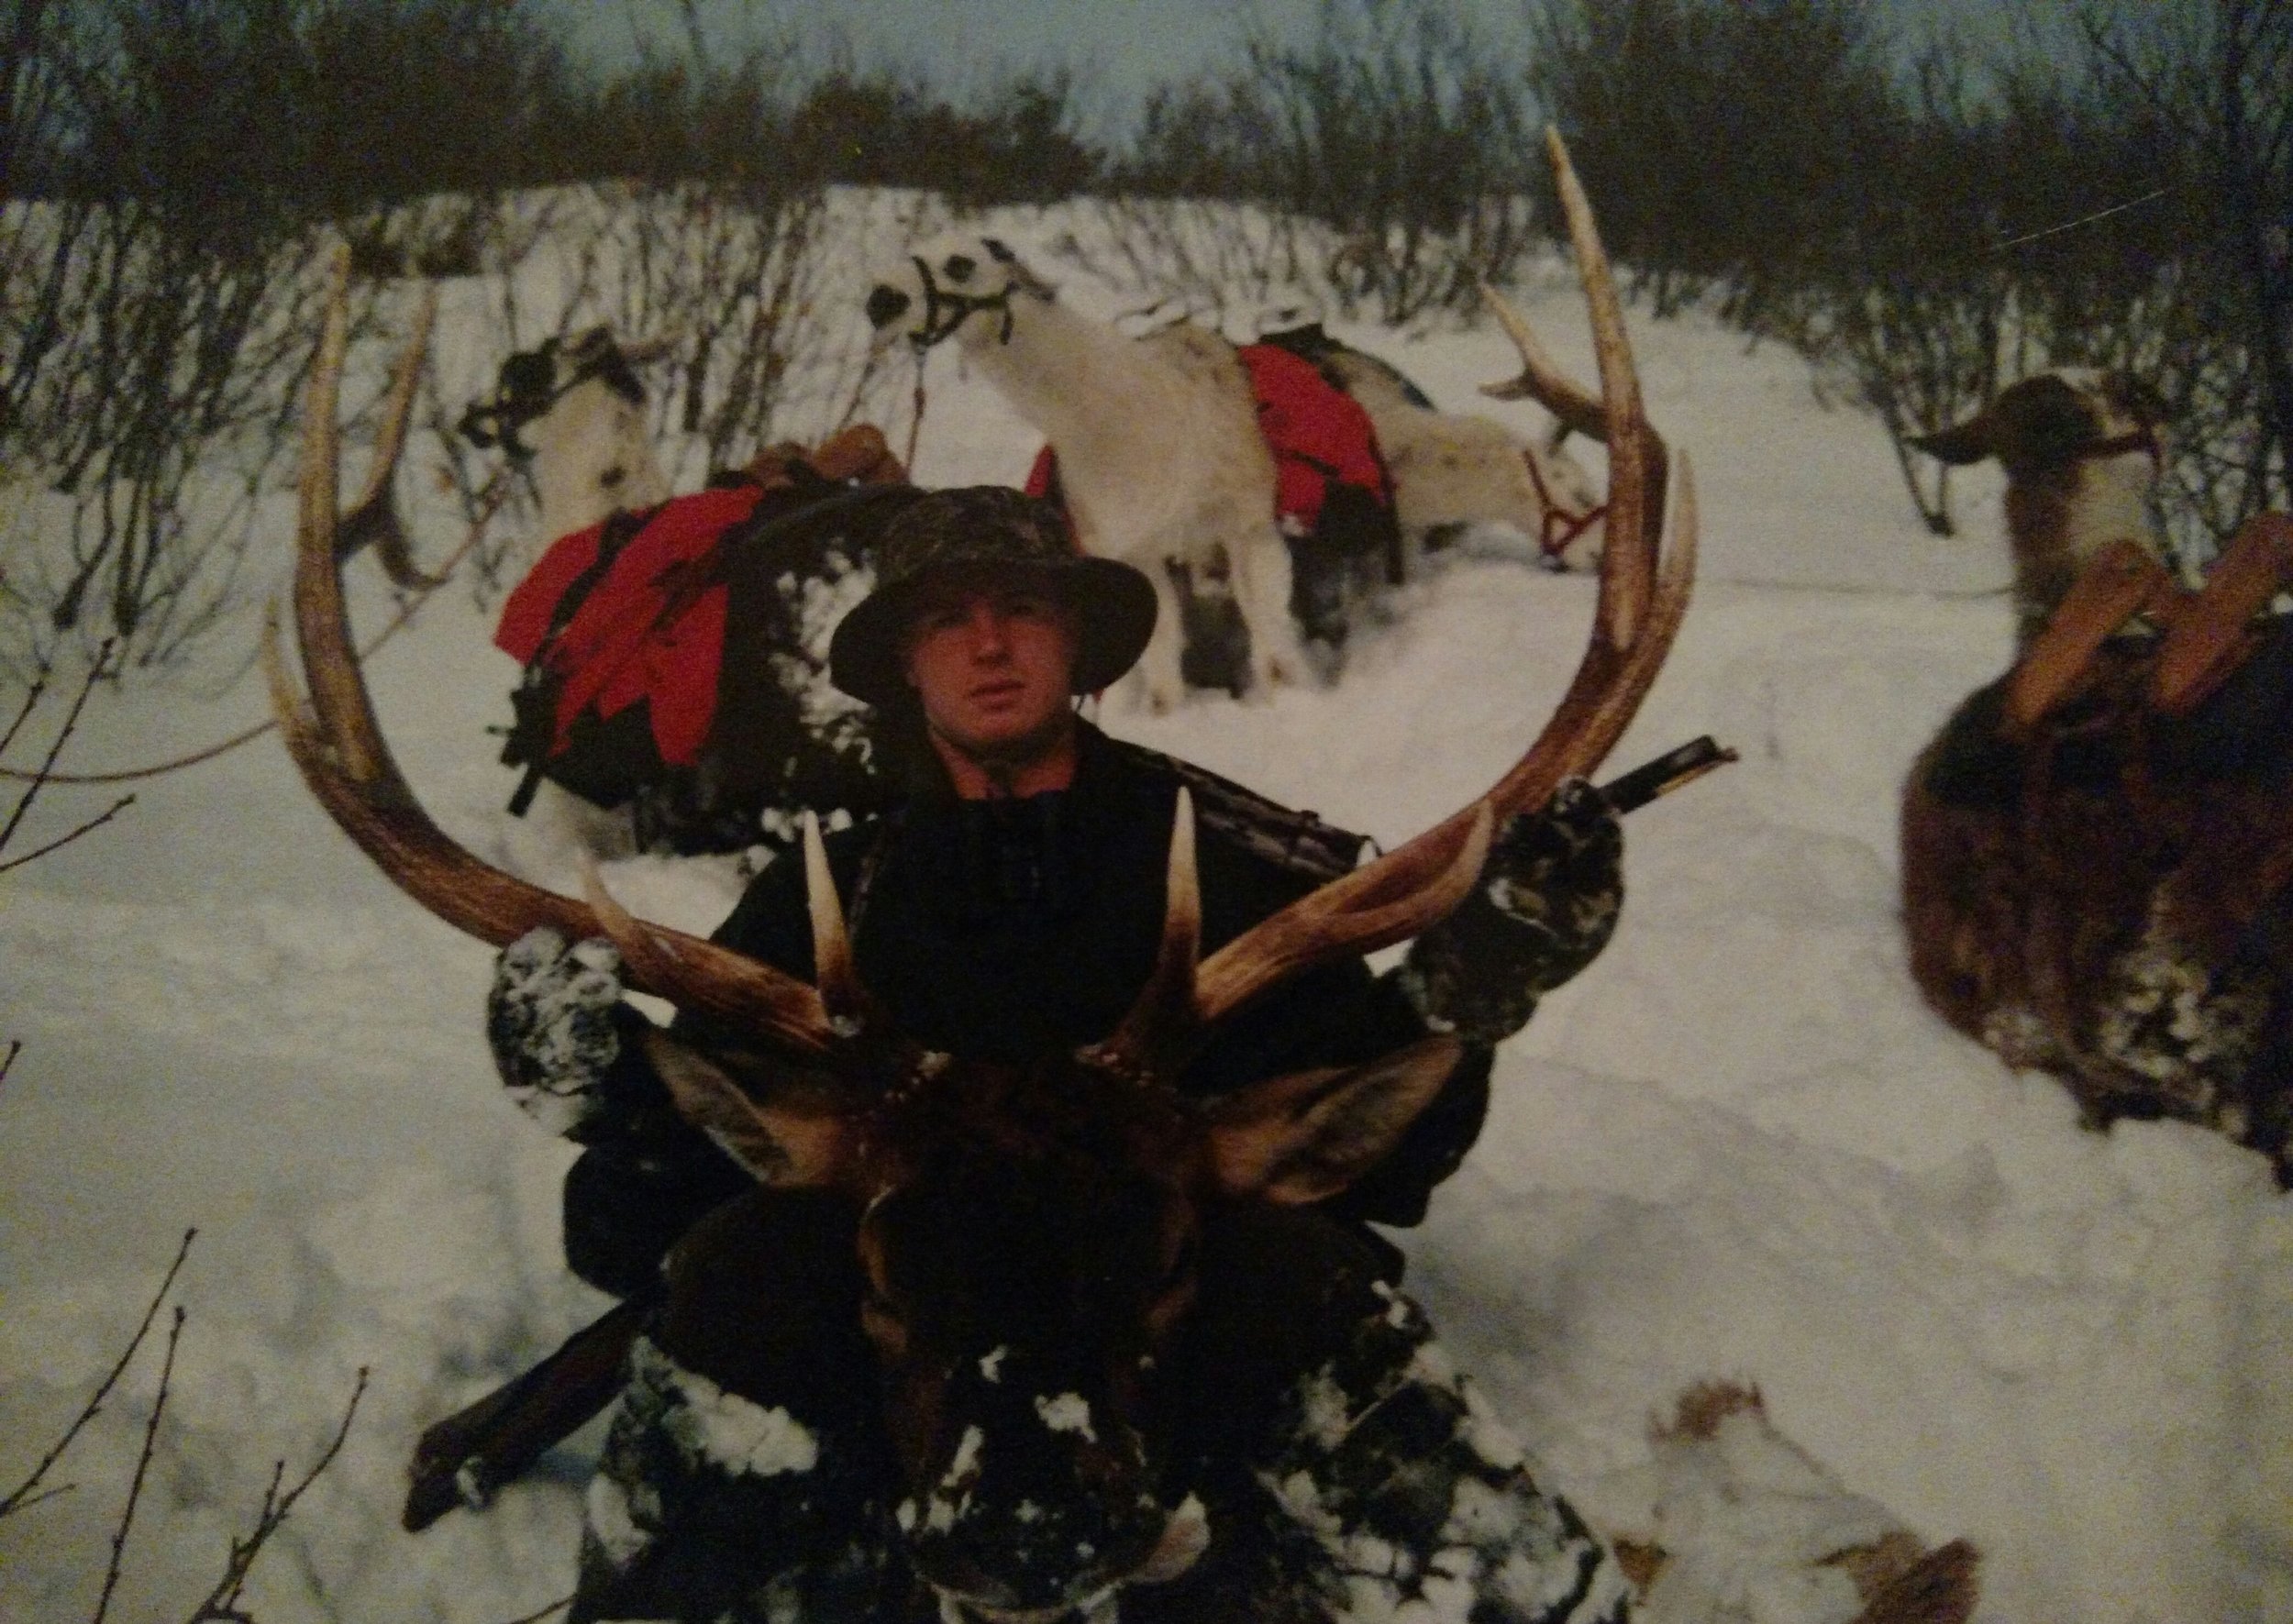 Idaho Elk Hunt Early 1990's...the good ole days of suck fests.&nbsp;